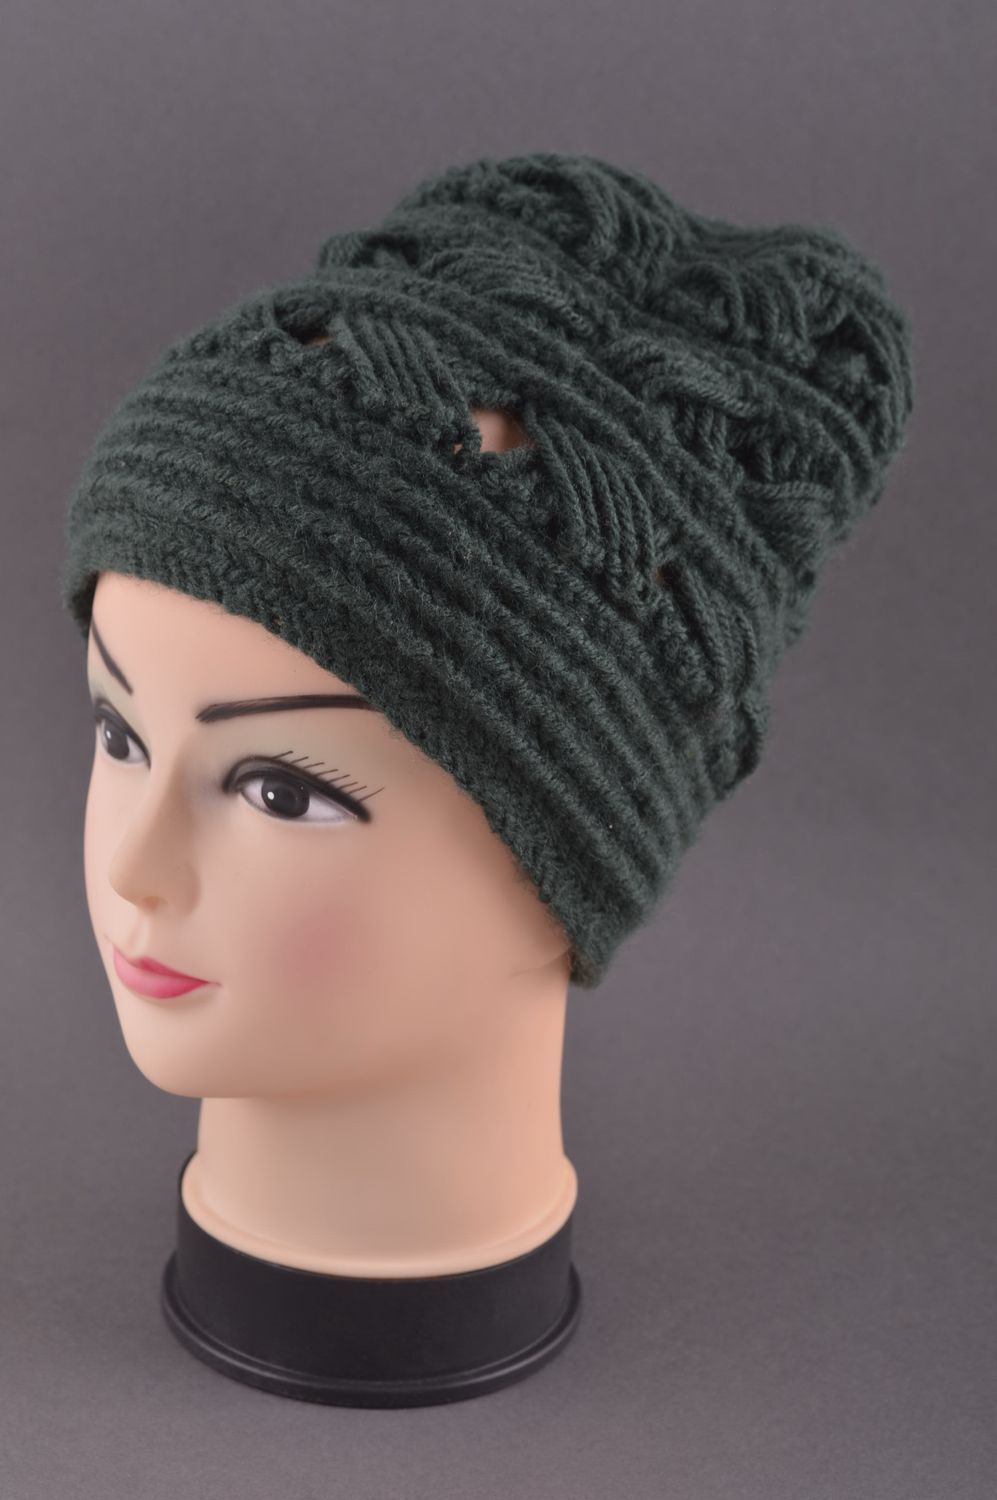 Handmade knitted hat fashion hat for women winter accessories for girls photo 1